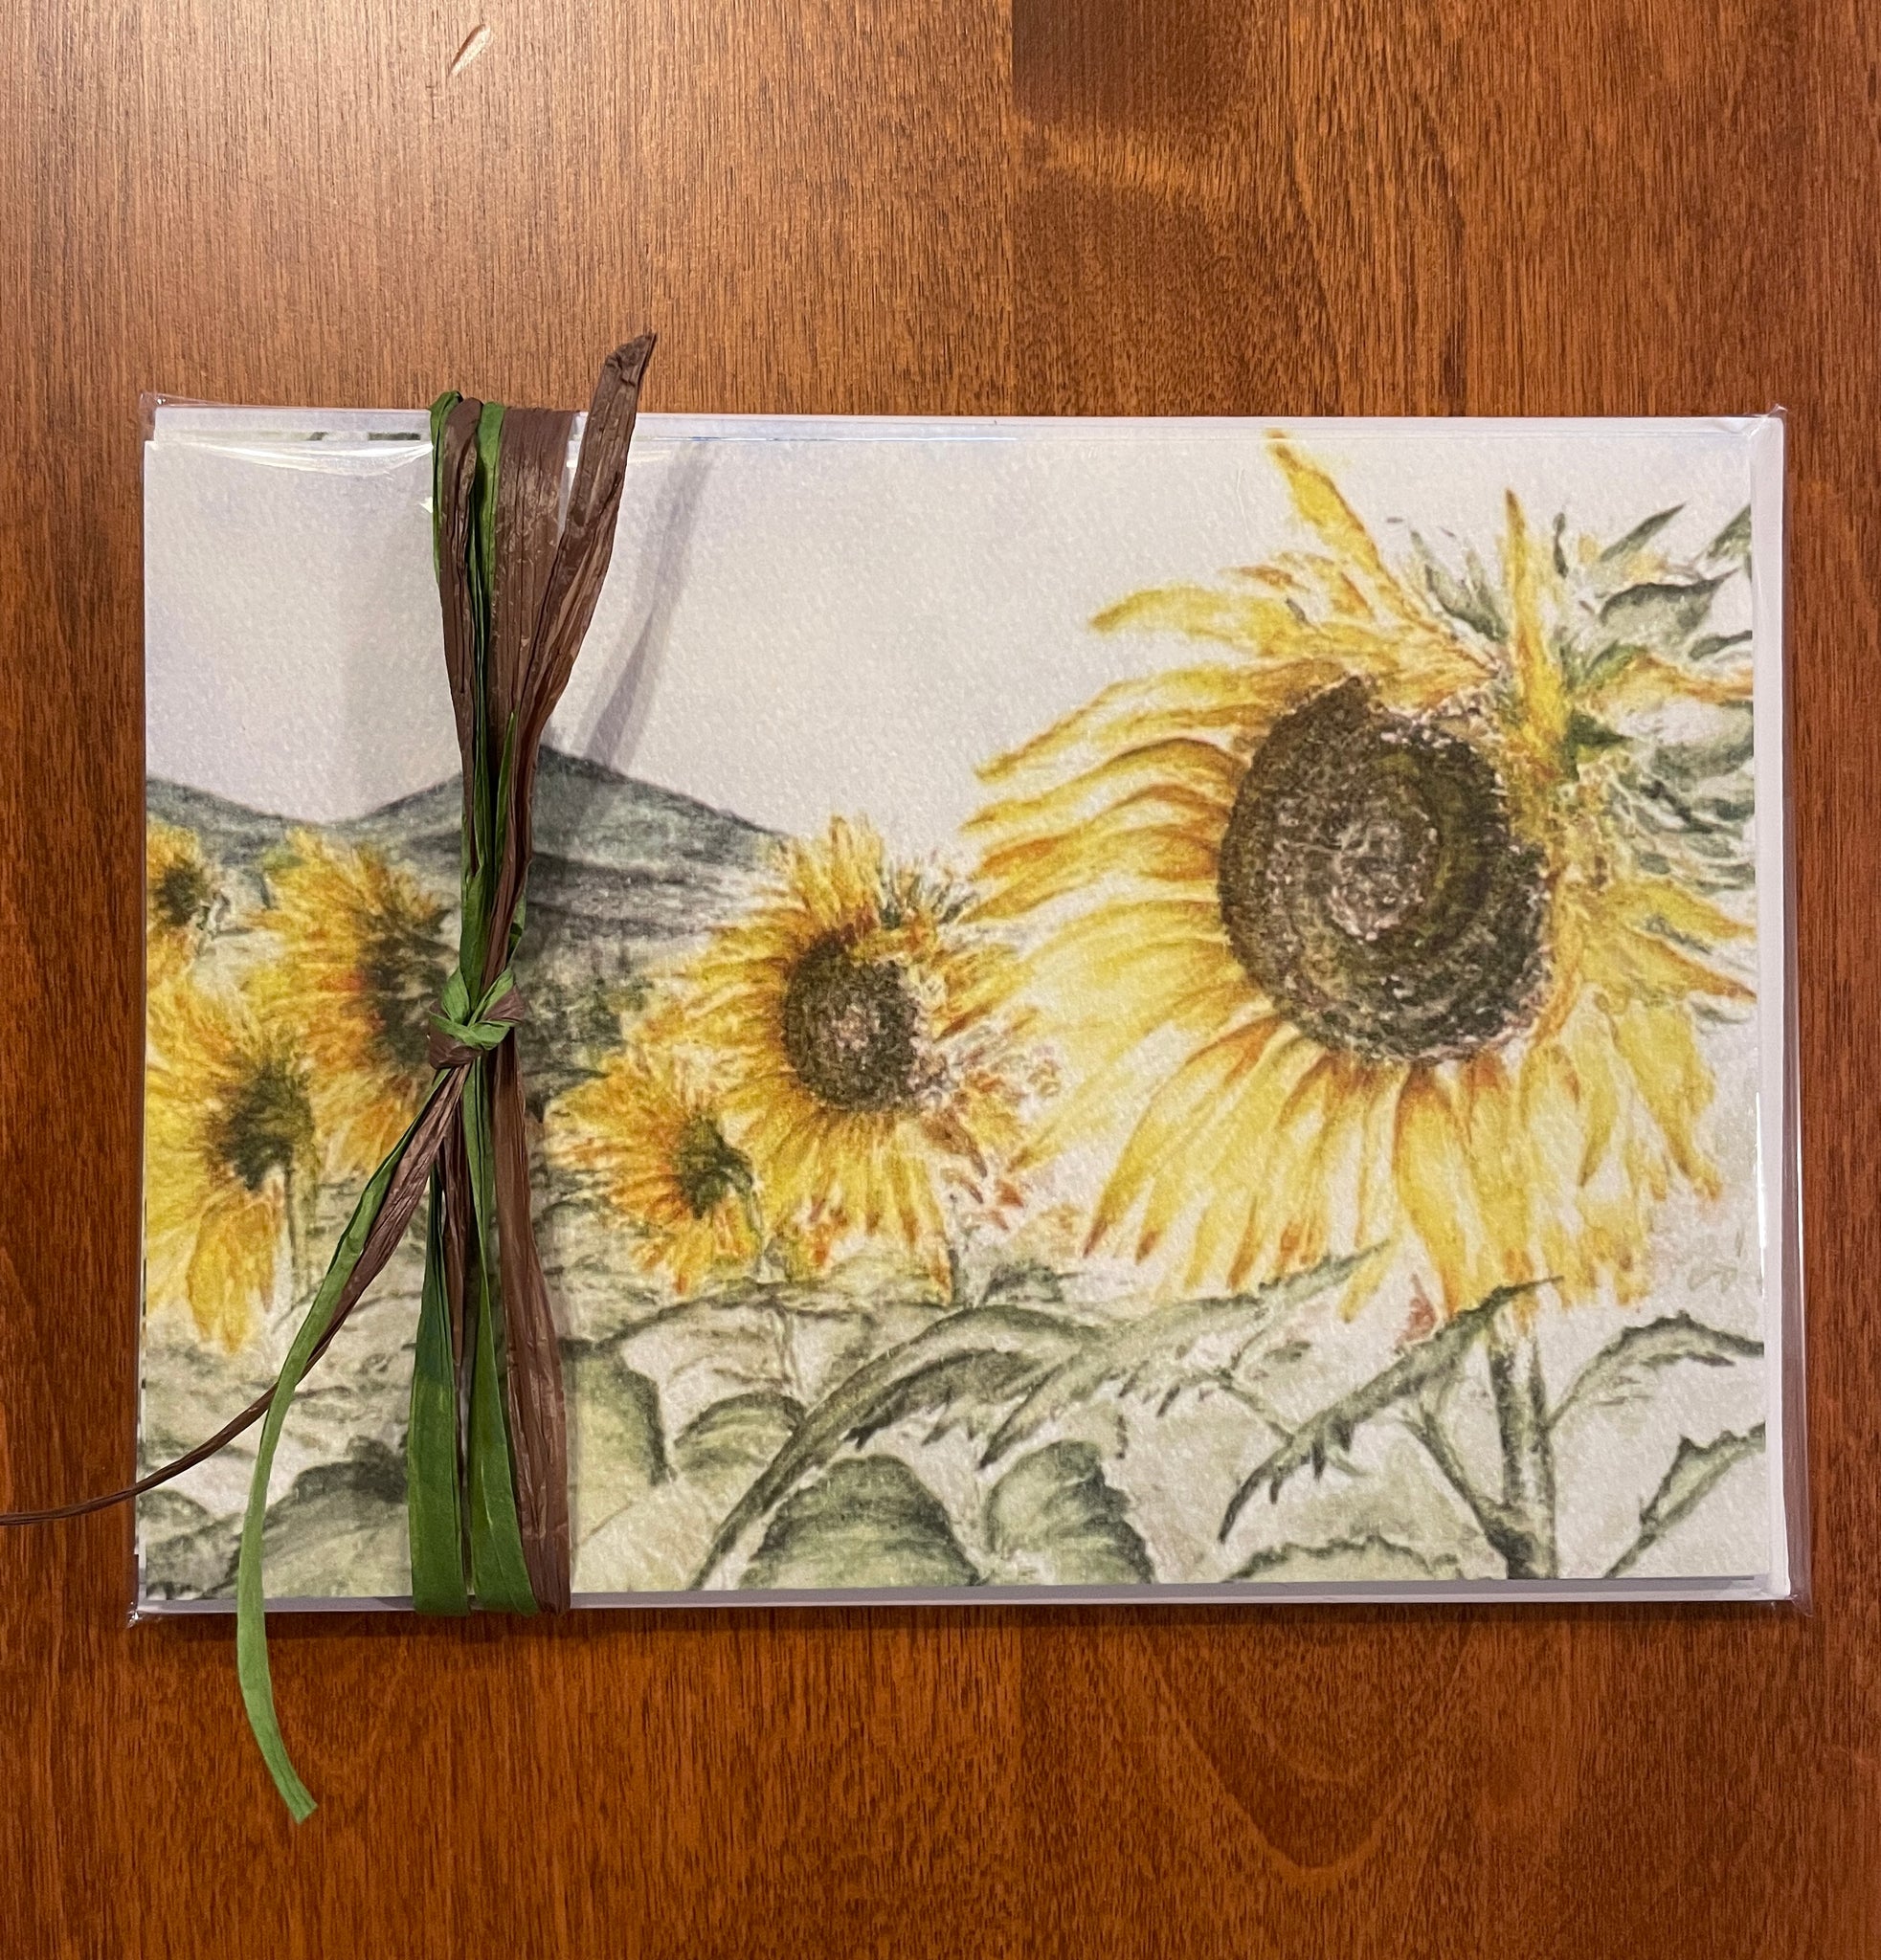 Sunflowers cards (3 pack)